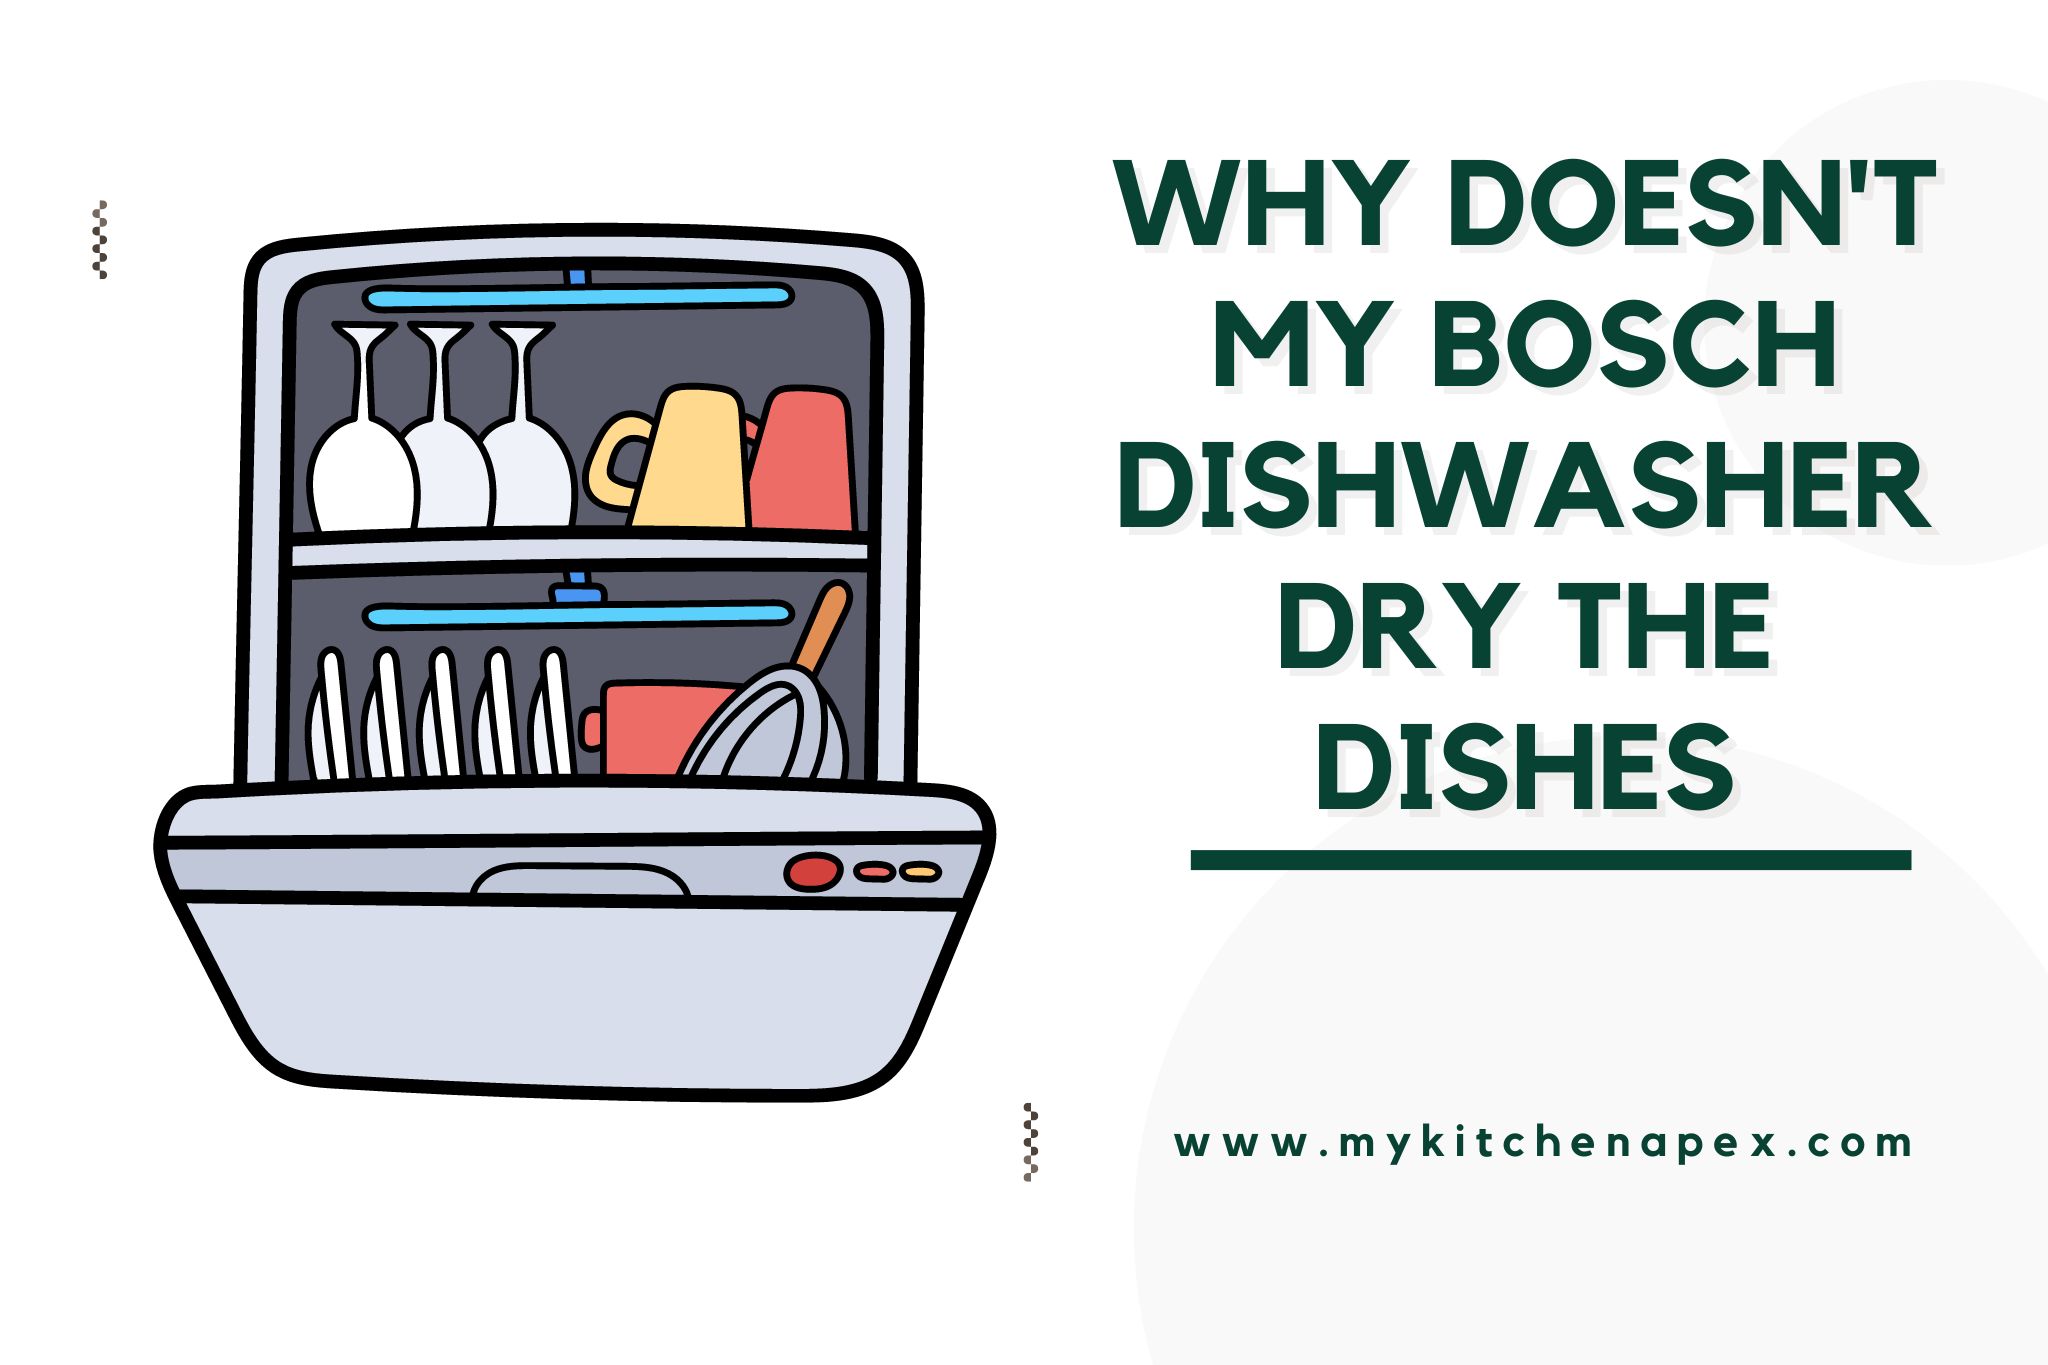 why doesn't my bosch dishwasher dry the dishes